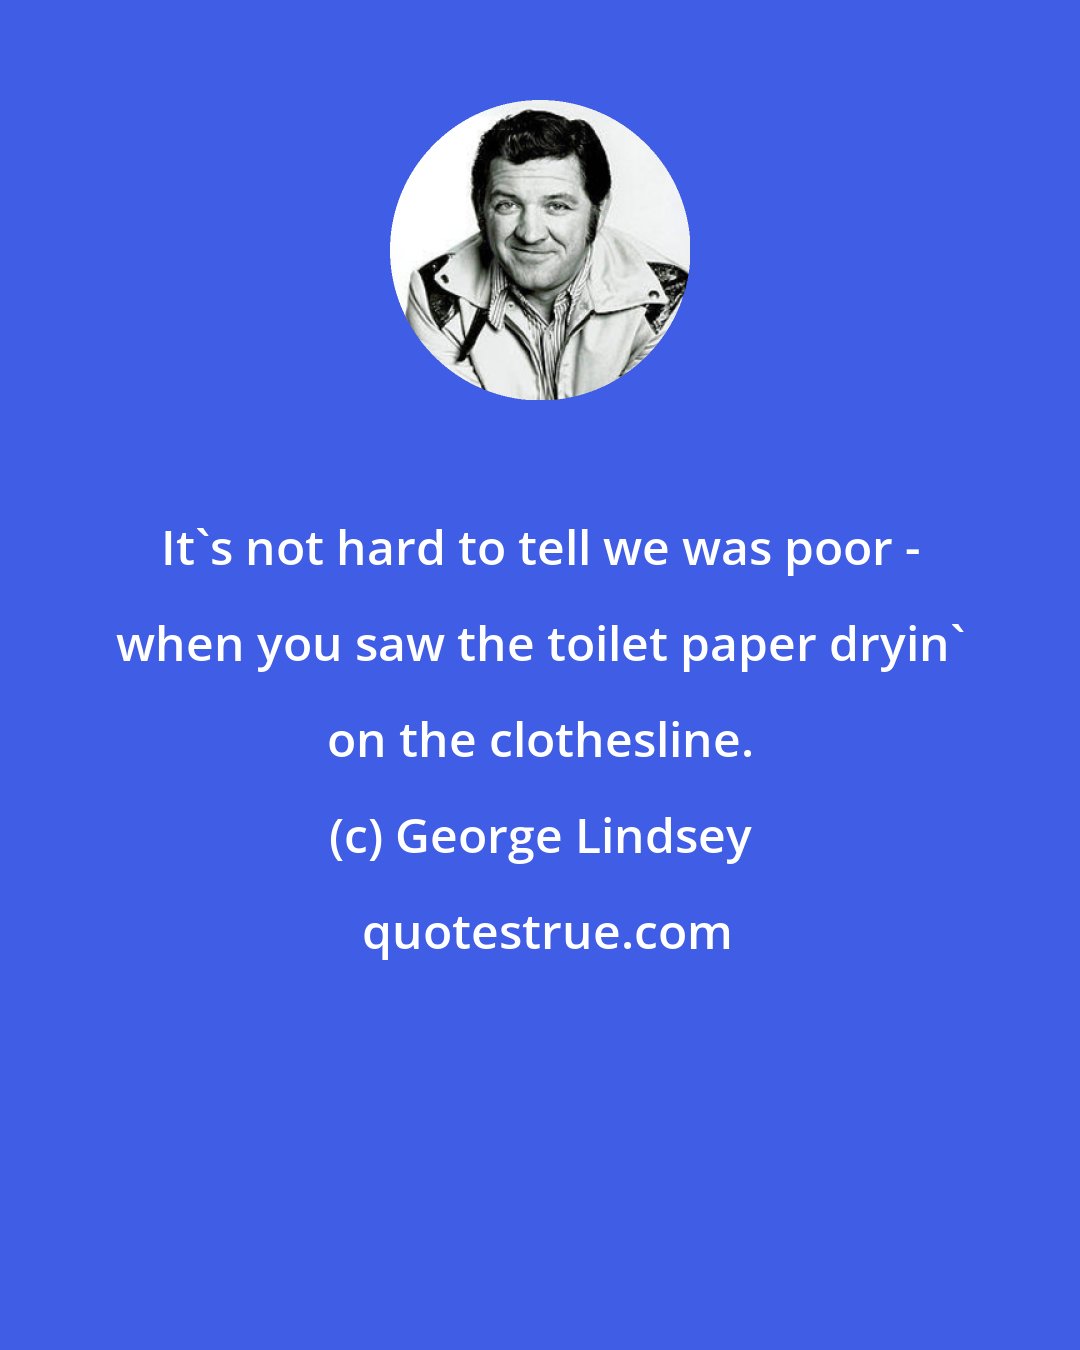 George Lindsey: It's not hard to tell we was poor - when you saw the toilet paper dryin' on the clothesline.